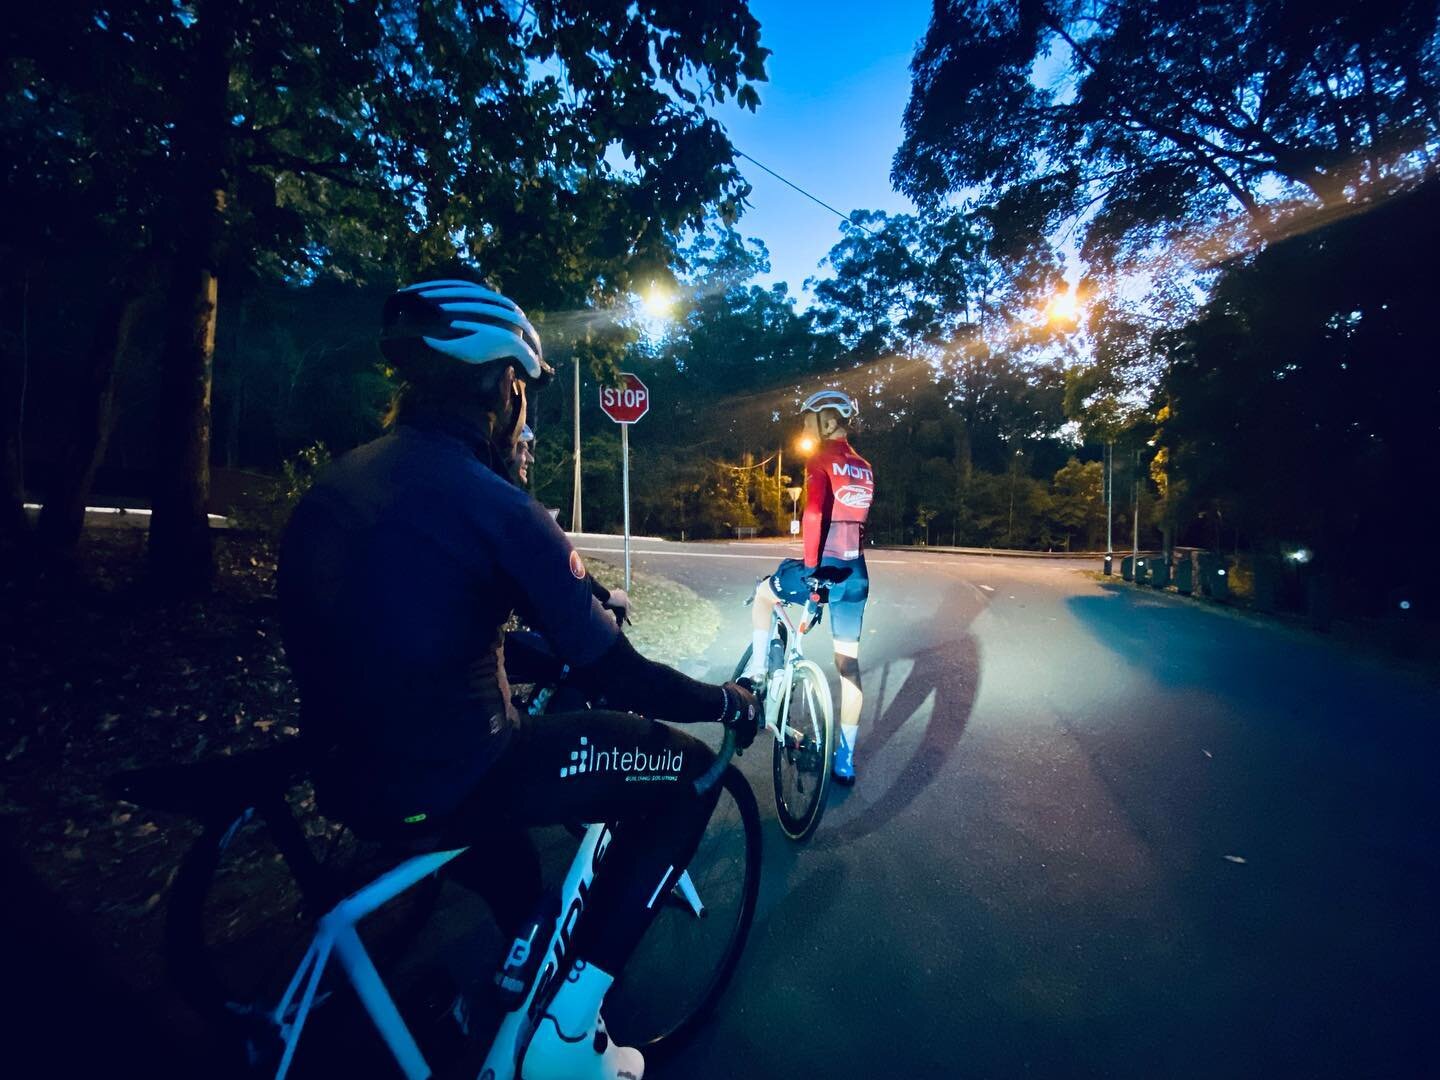 The pre dawn Coot-tha raid. Zero regrets when your sipping the post ride brew. #coothatuesday #thepedaler